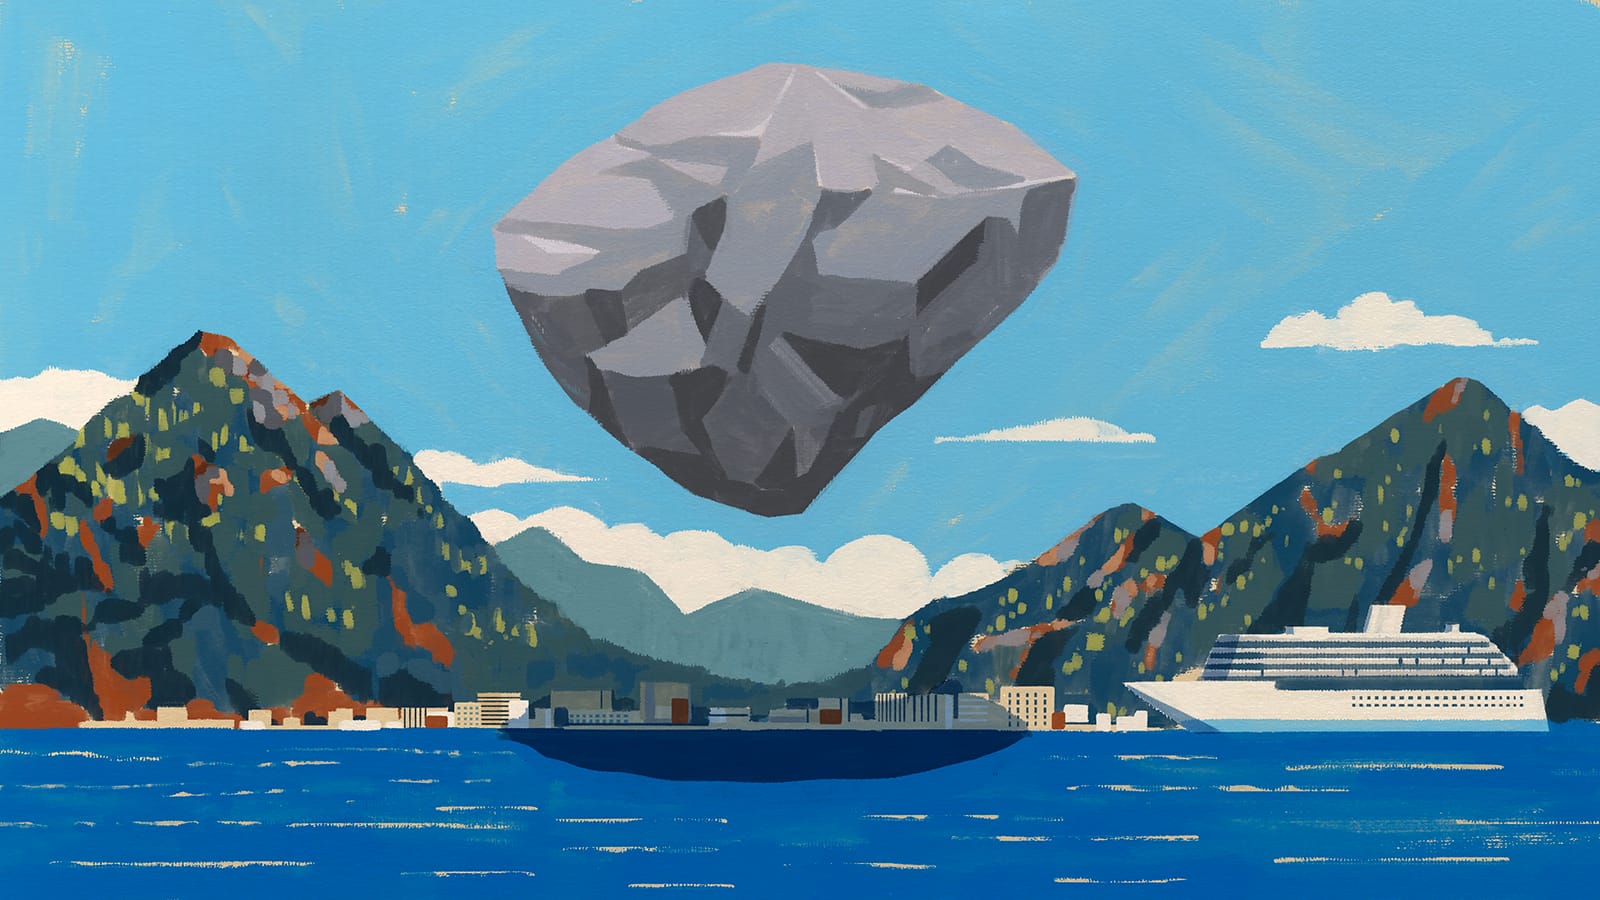 A hand-made illustration of a giant boulder hanging over a coastal town surrounded by mountains in Alaska.